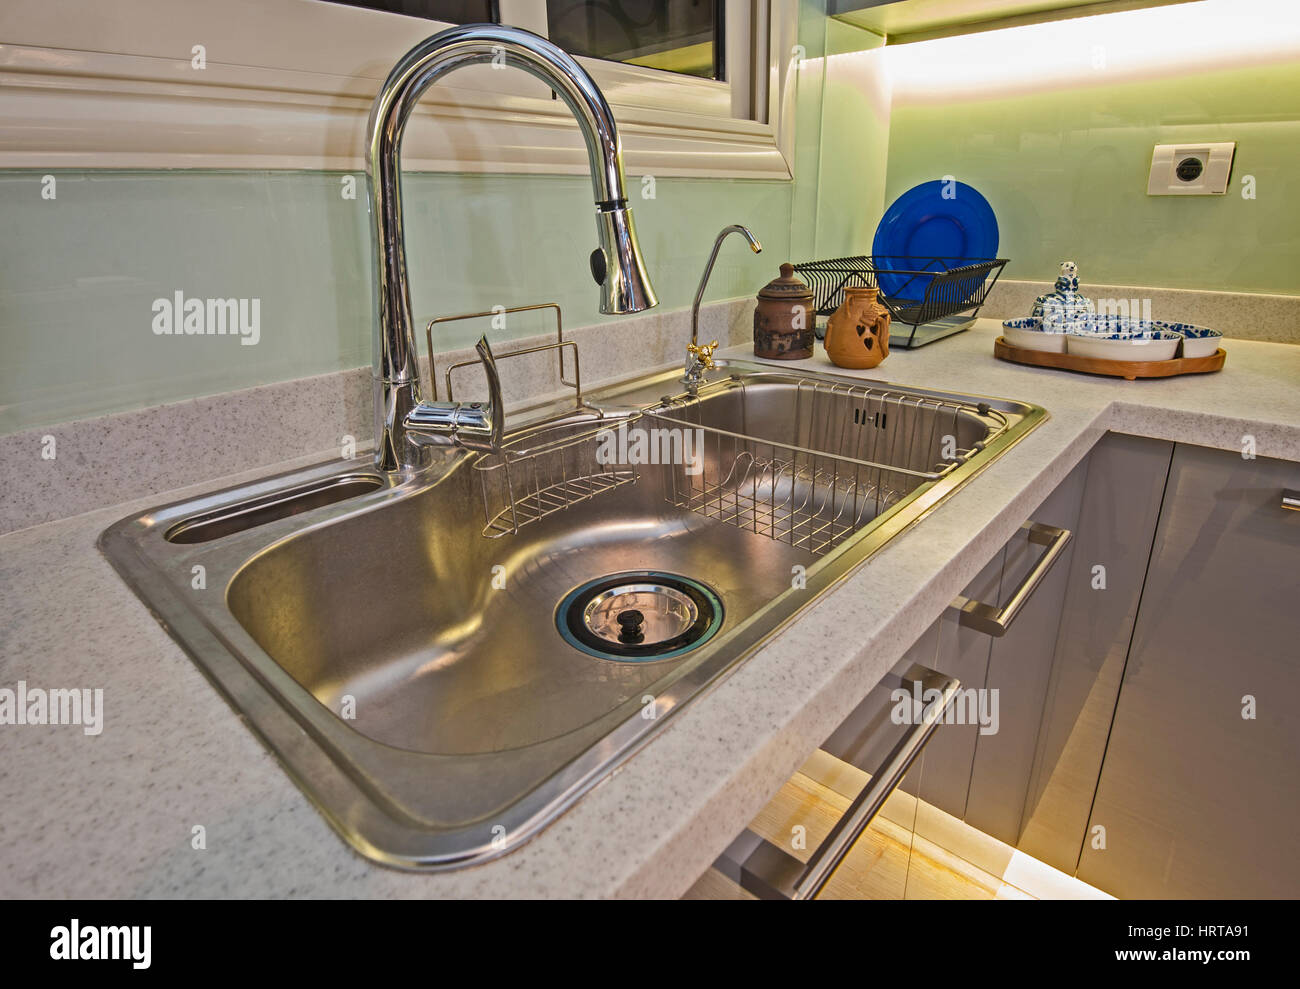 Interior design decor of kitchen in luxury apartment with metal sink and faucet Stock Photo